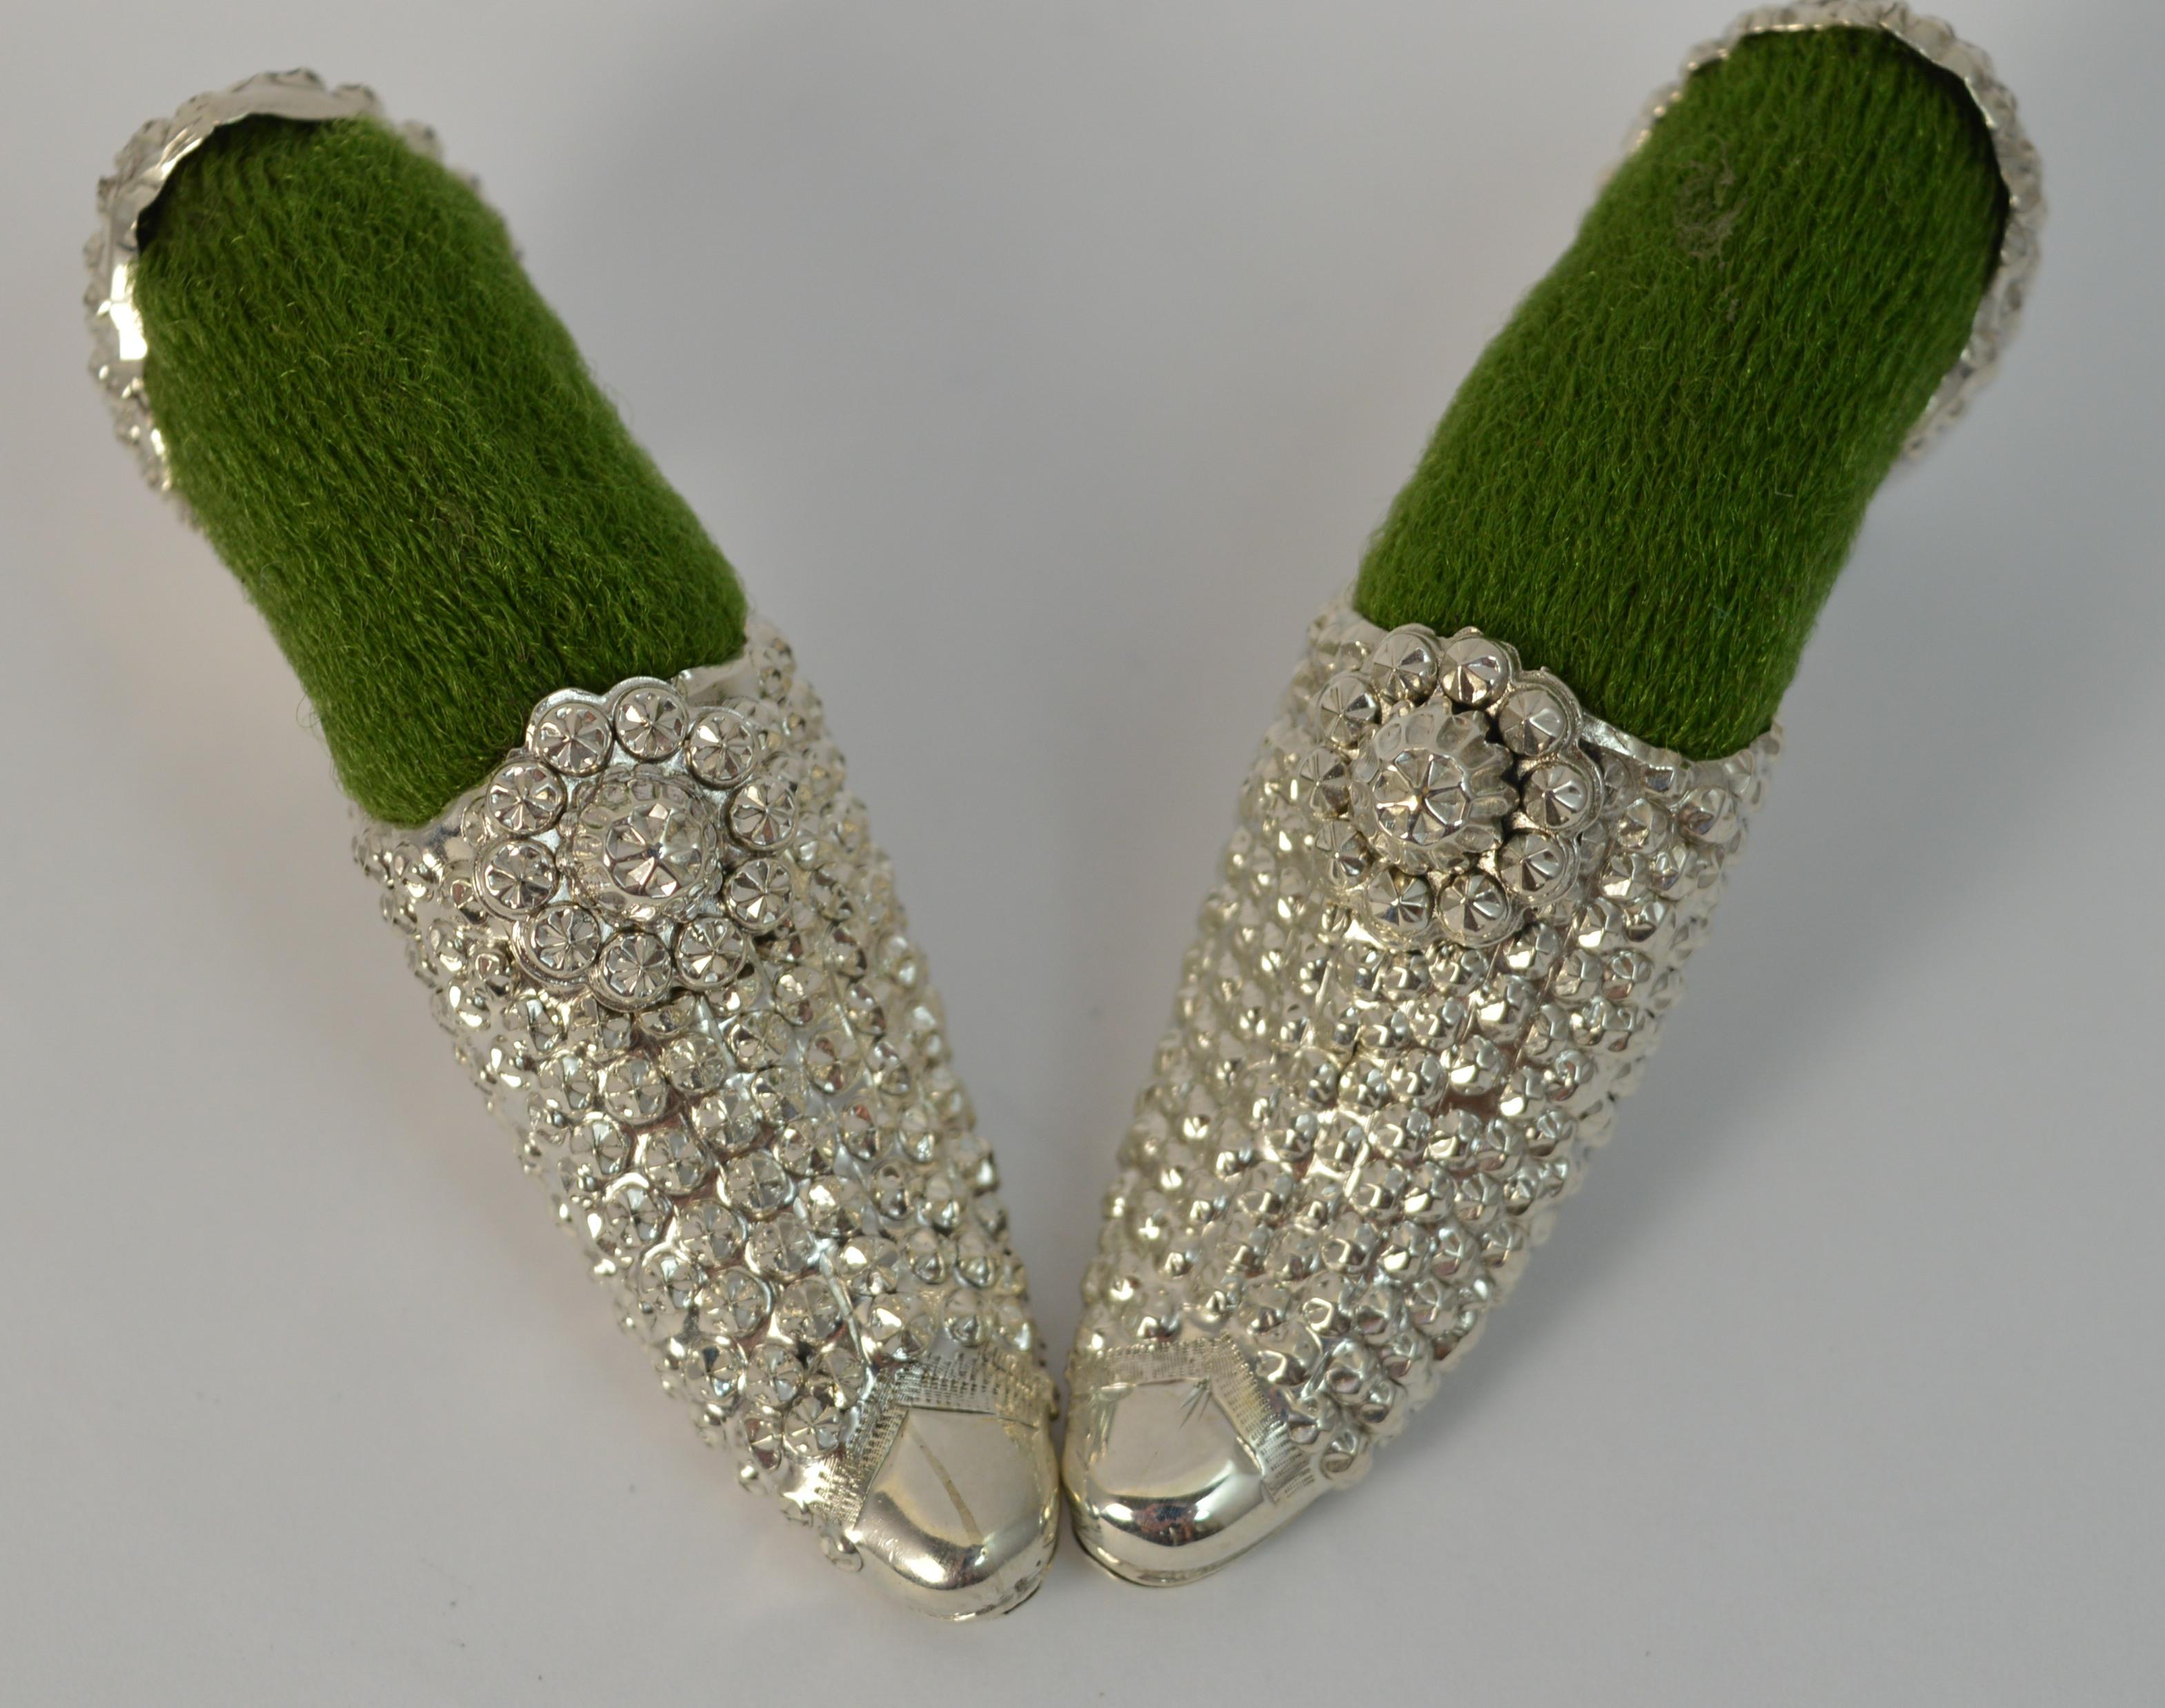 

A superb pair of antique solid silver pin cushions. Both English made with matching designs to the shoe throughout. Green inserts.

Hallmarks ; lion, Birmingham assay, date letter y and b, makers initials 
Size ; 6.5cm long 2.7cm tall